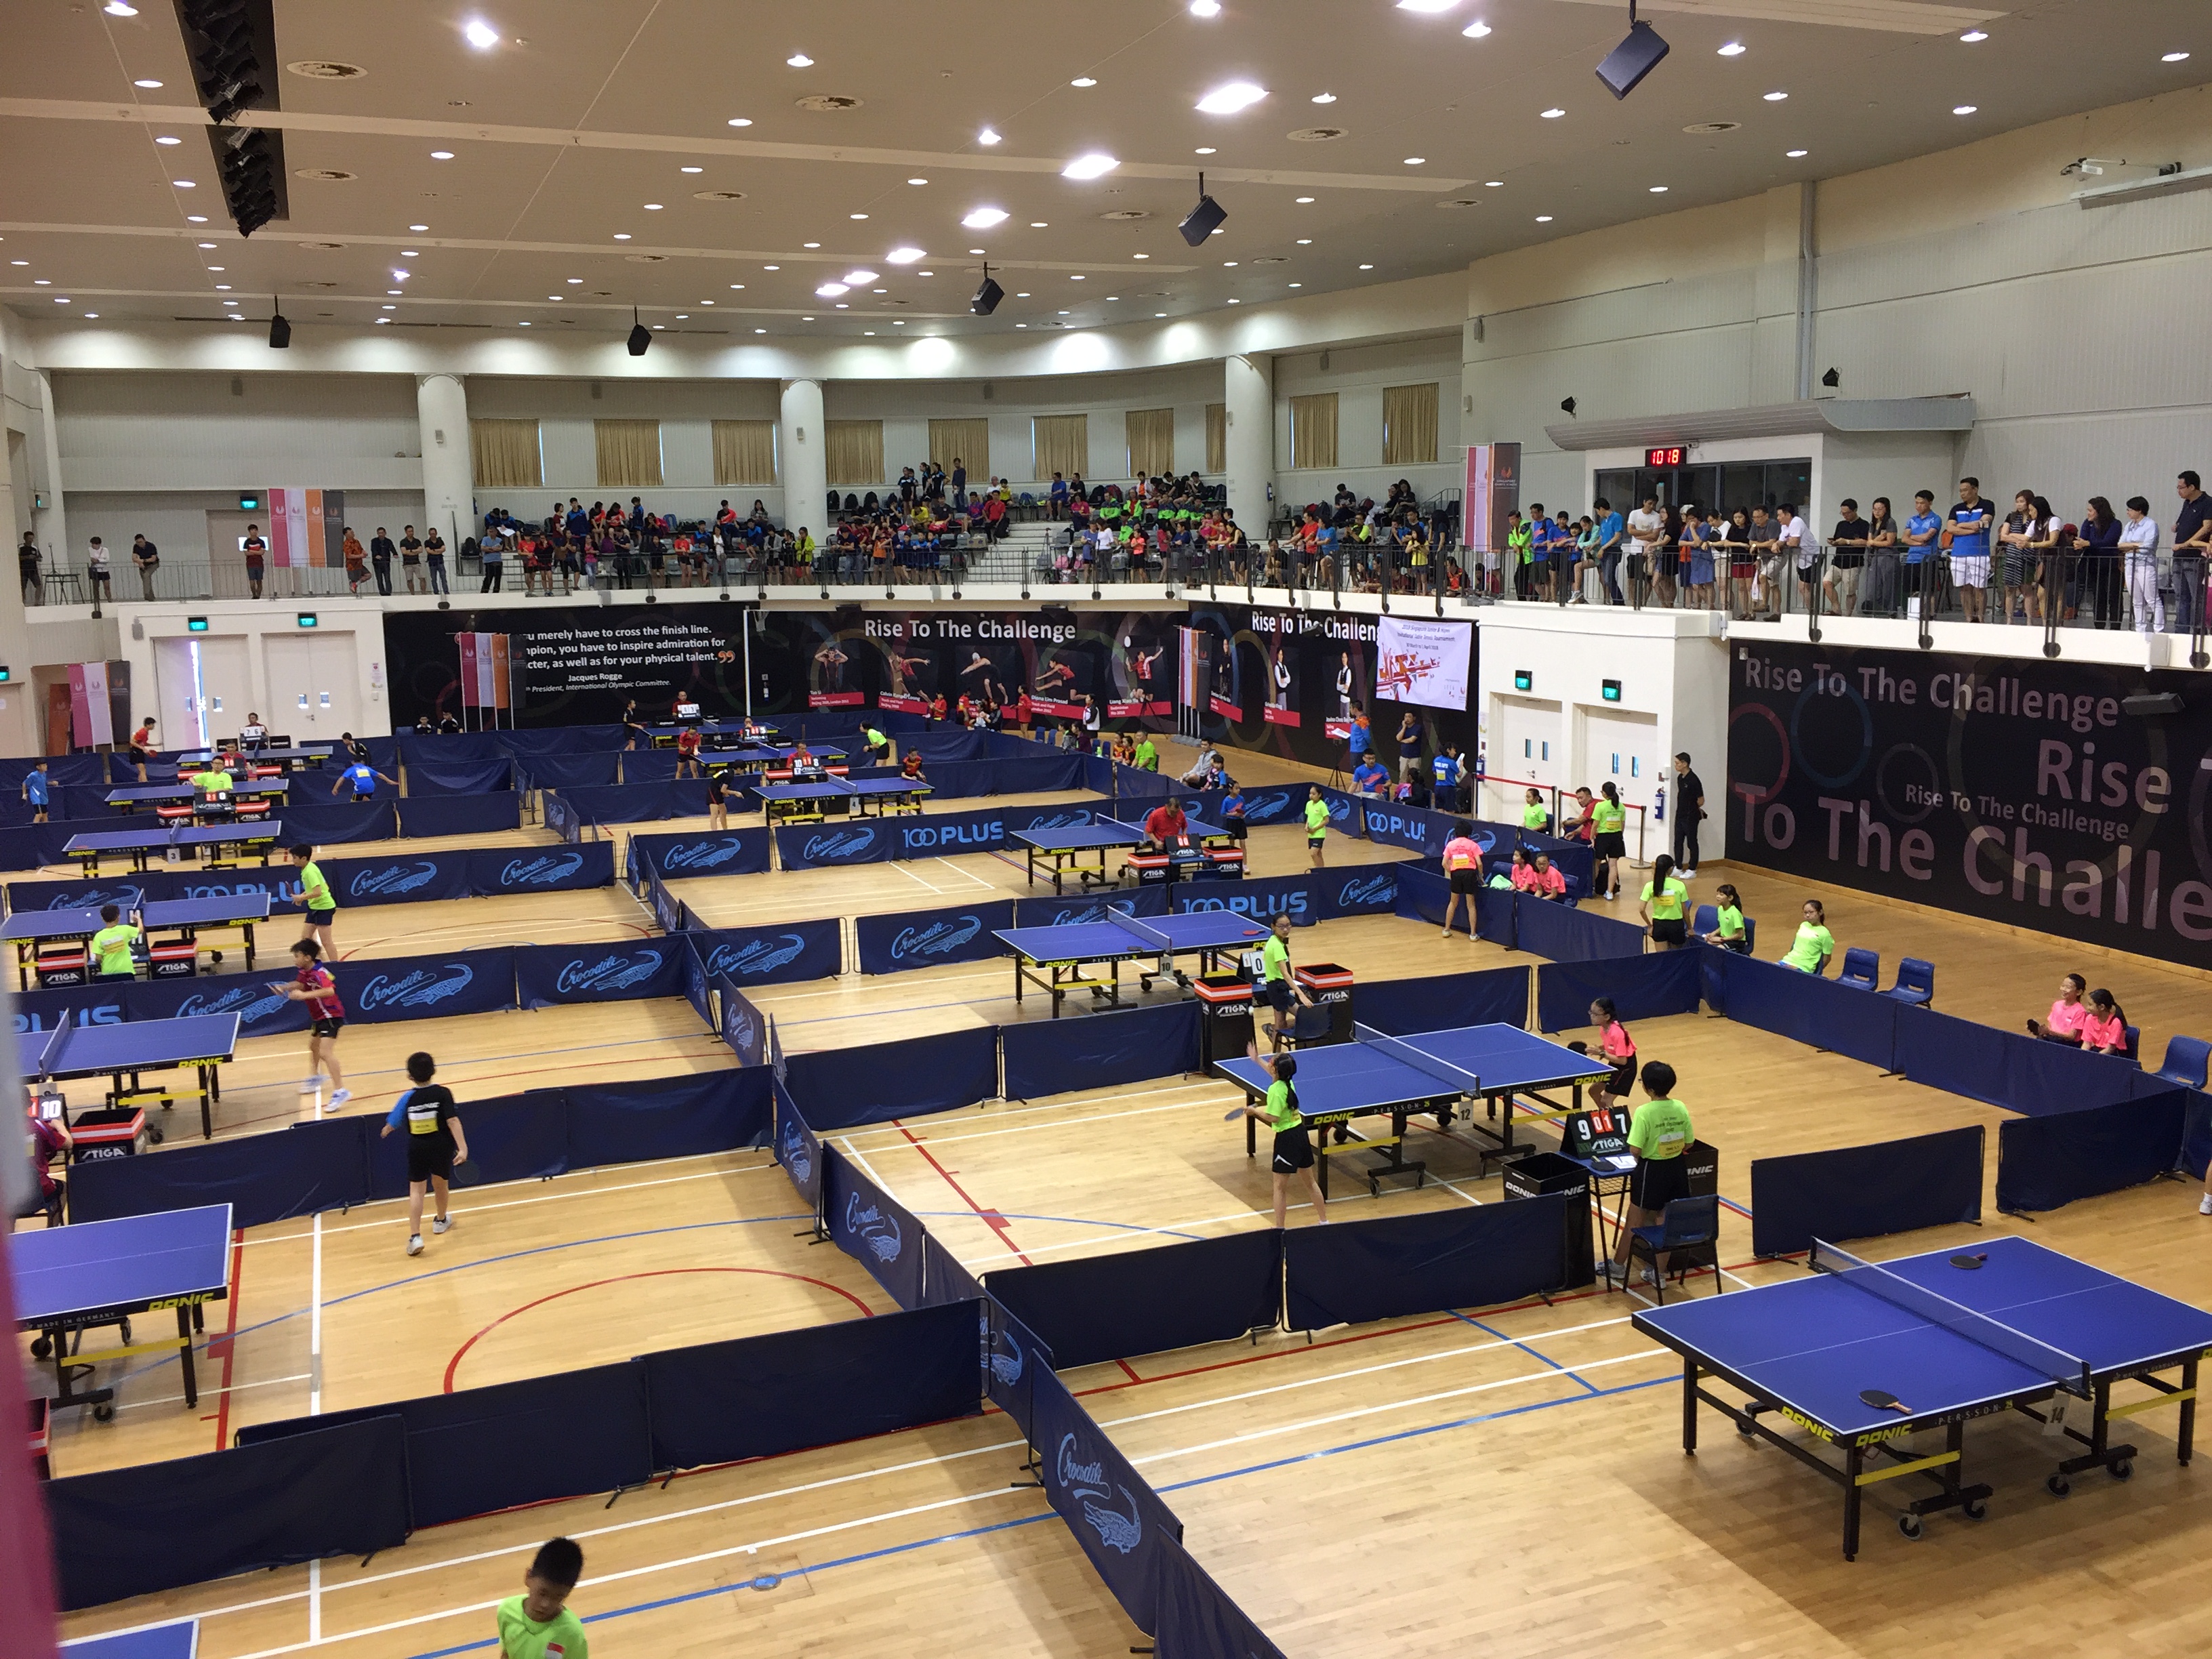 3rd Singapore Junior and Hopes Invitational Table Tennis Tournament 2018 attracts record number of participants